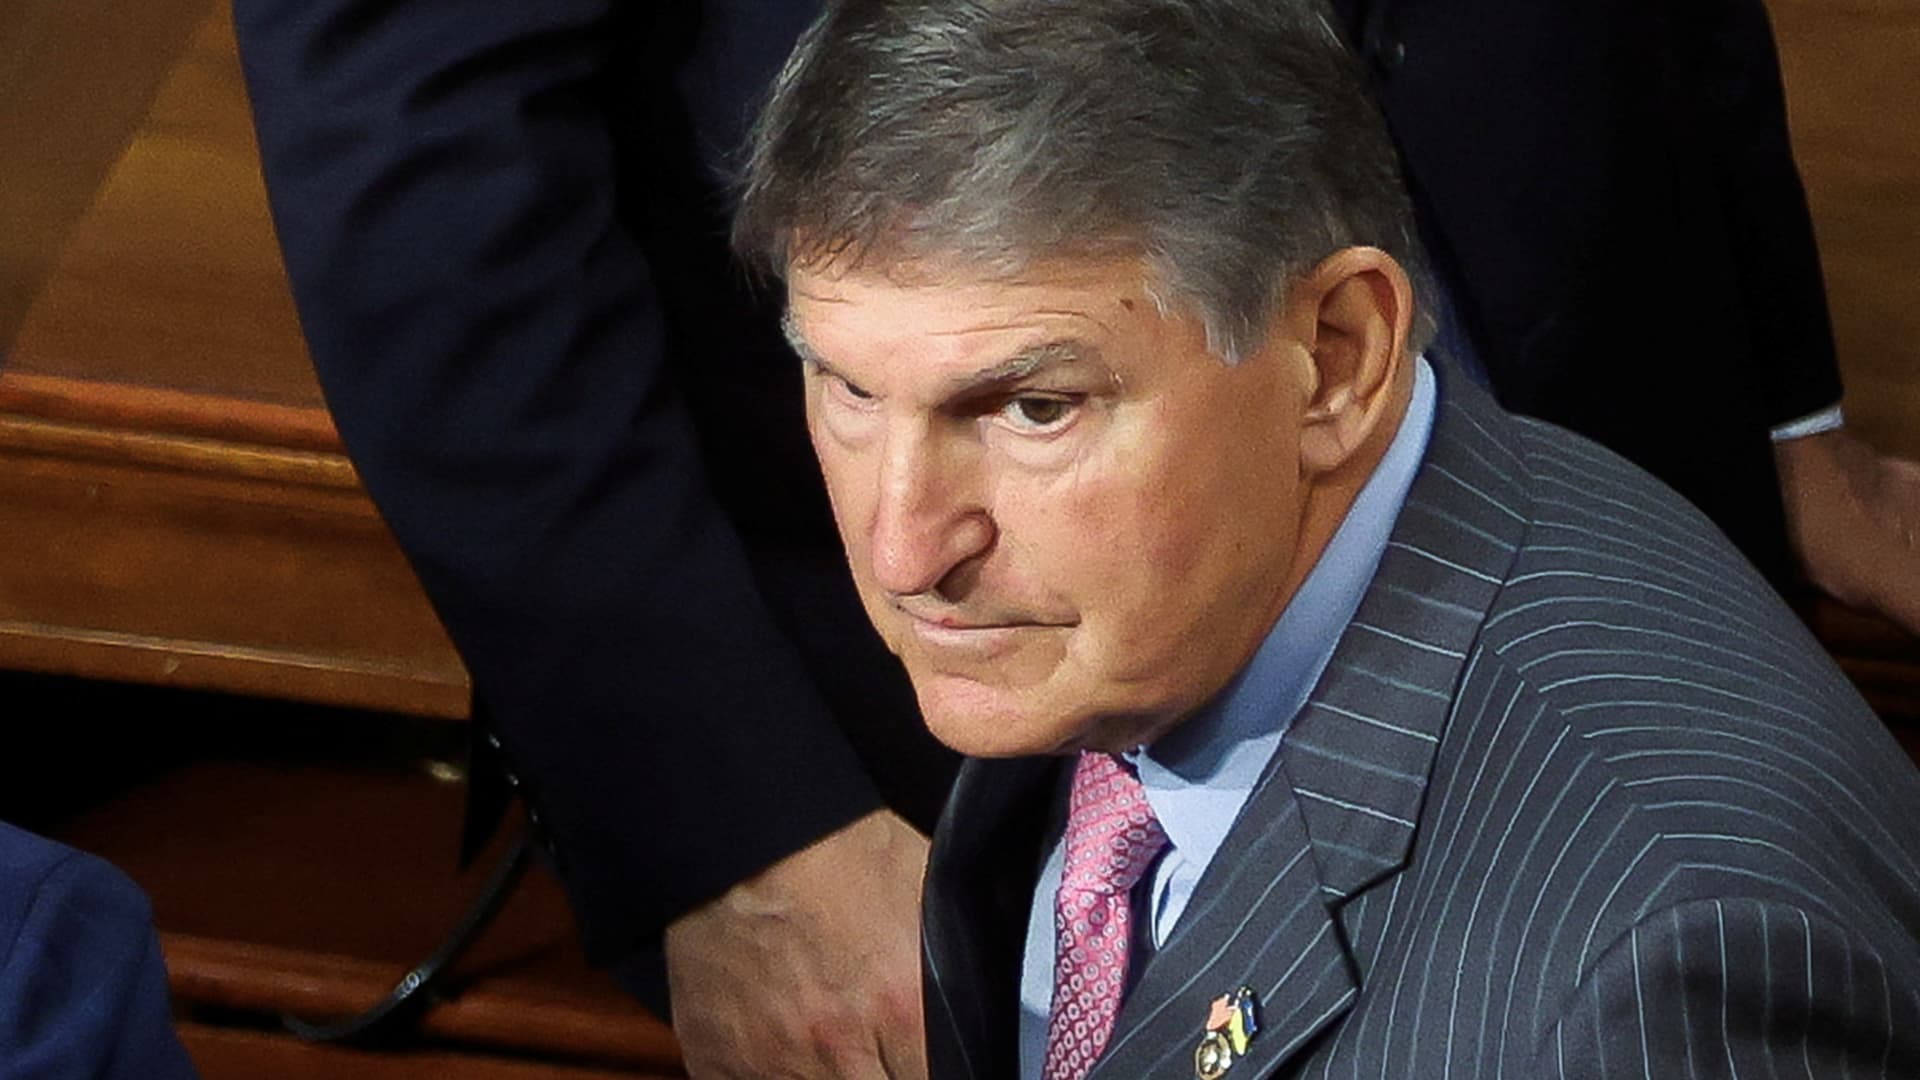 Manchin warns government to step up after Fitch credit rating downgrade